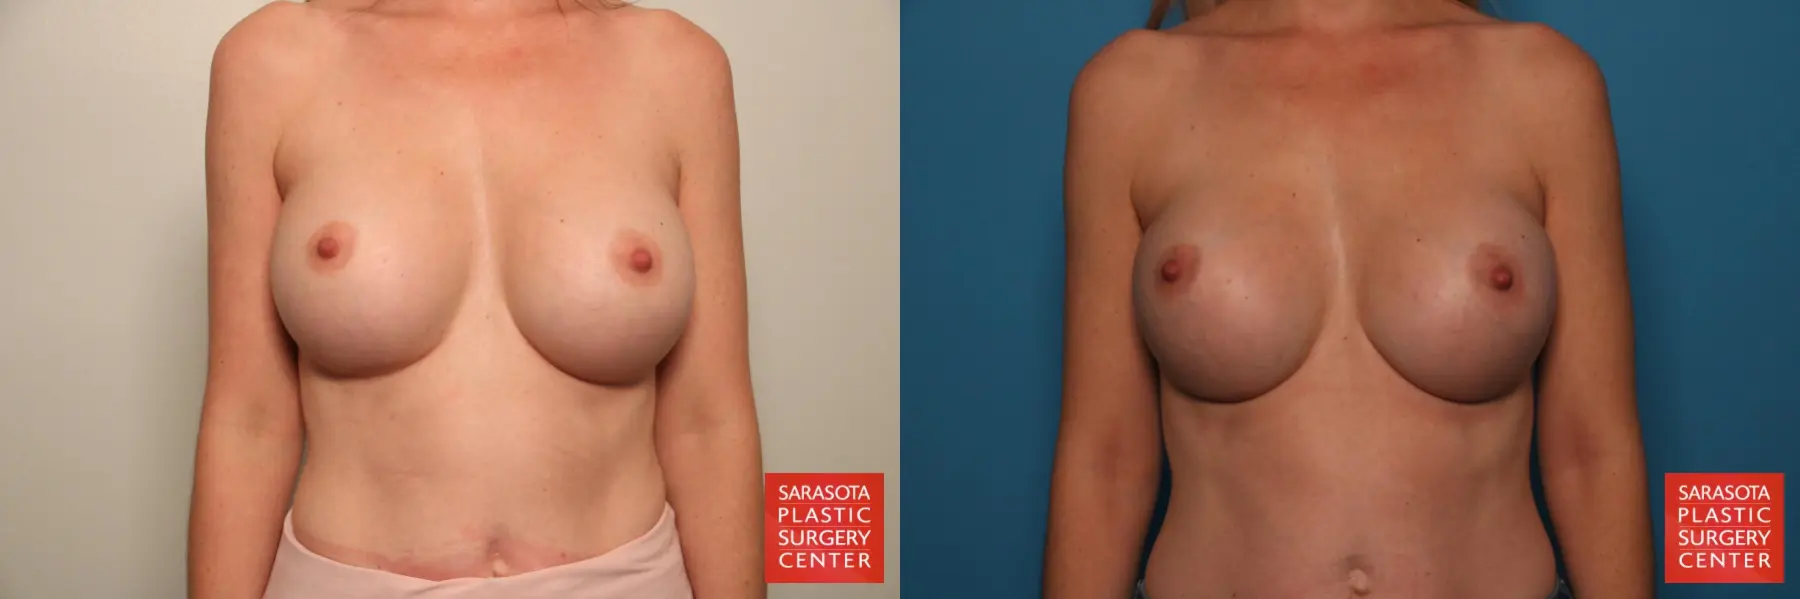 Breast Implant Removal/Replacement: Patient 10 - Before and After  